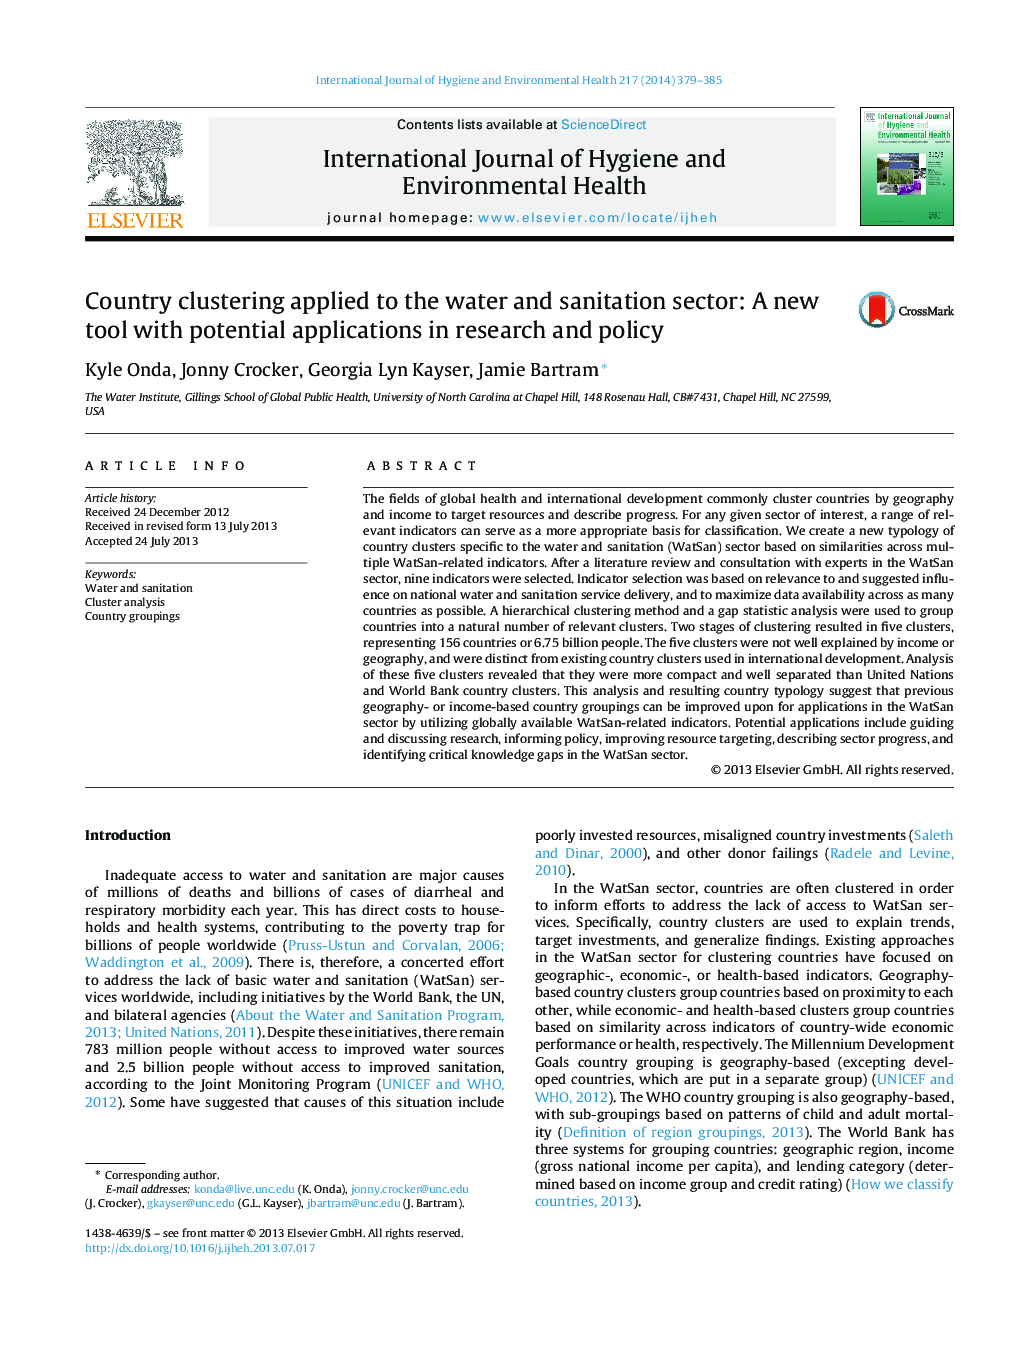 Country clustering applied to the water and sanitation sector: A new tool with potential applications in research and policy